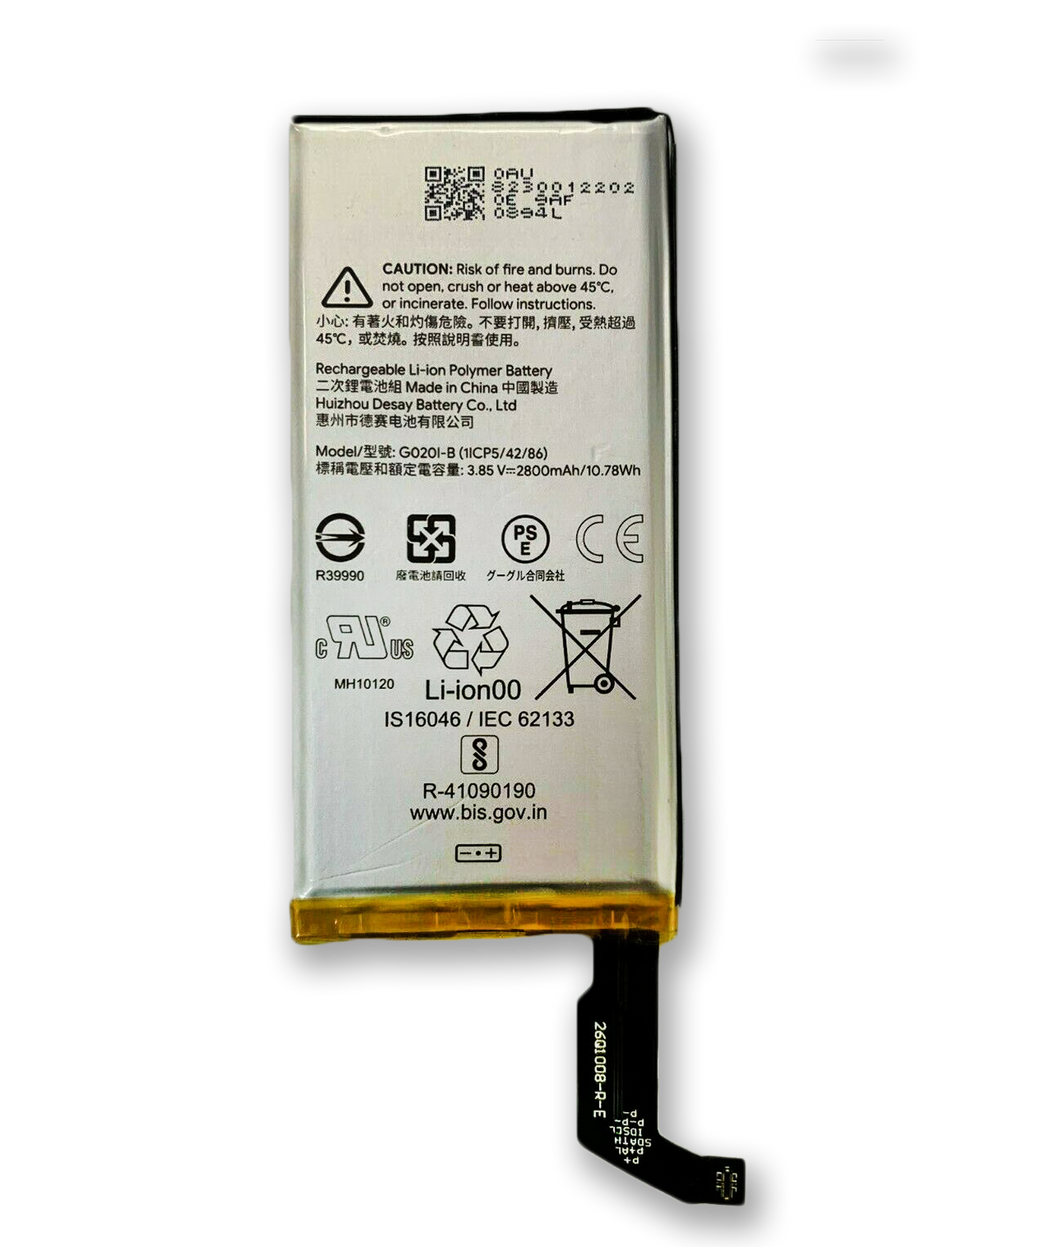 Replacement Battery for Google Pixel 4 G020I-B (1ICP5/42/86) 2800mAh